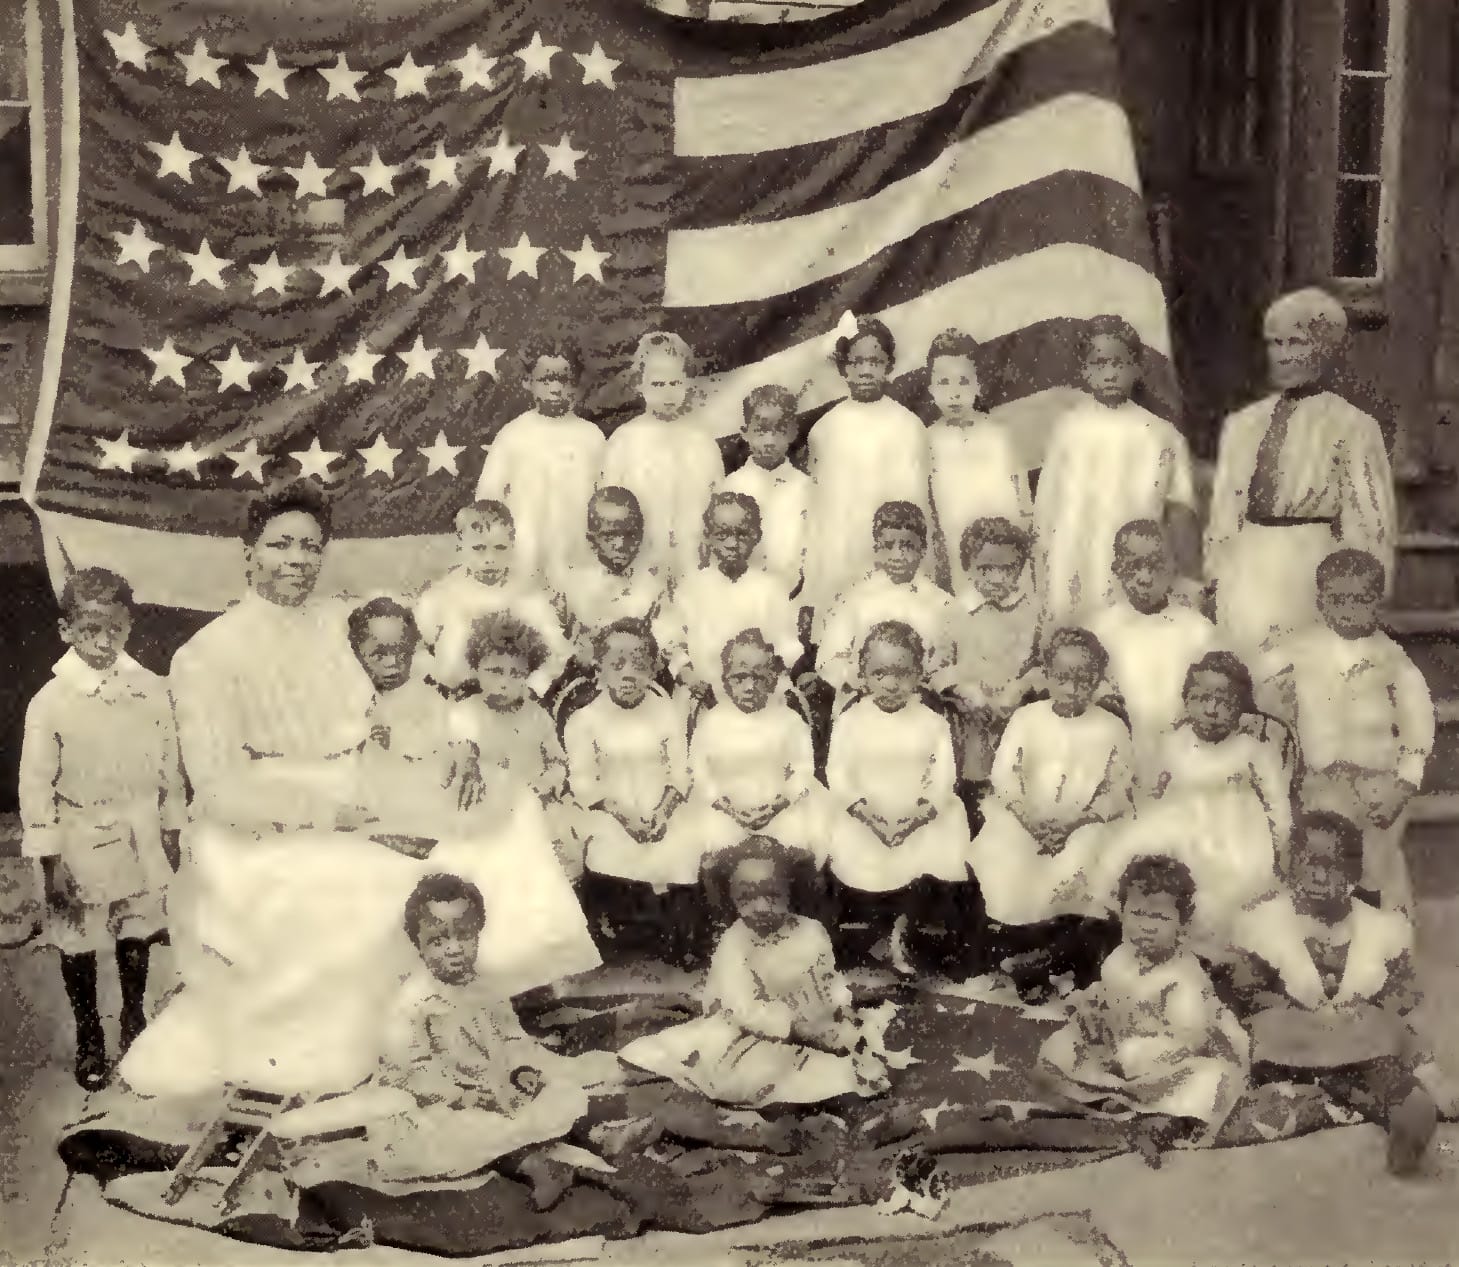 1906 Future American Citizens at the New York Hope Day Nursery